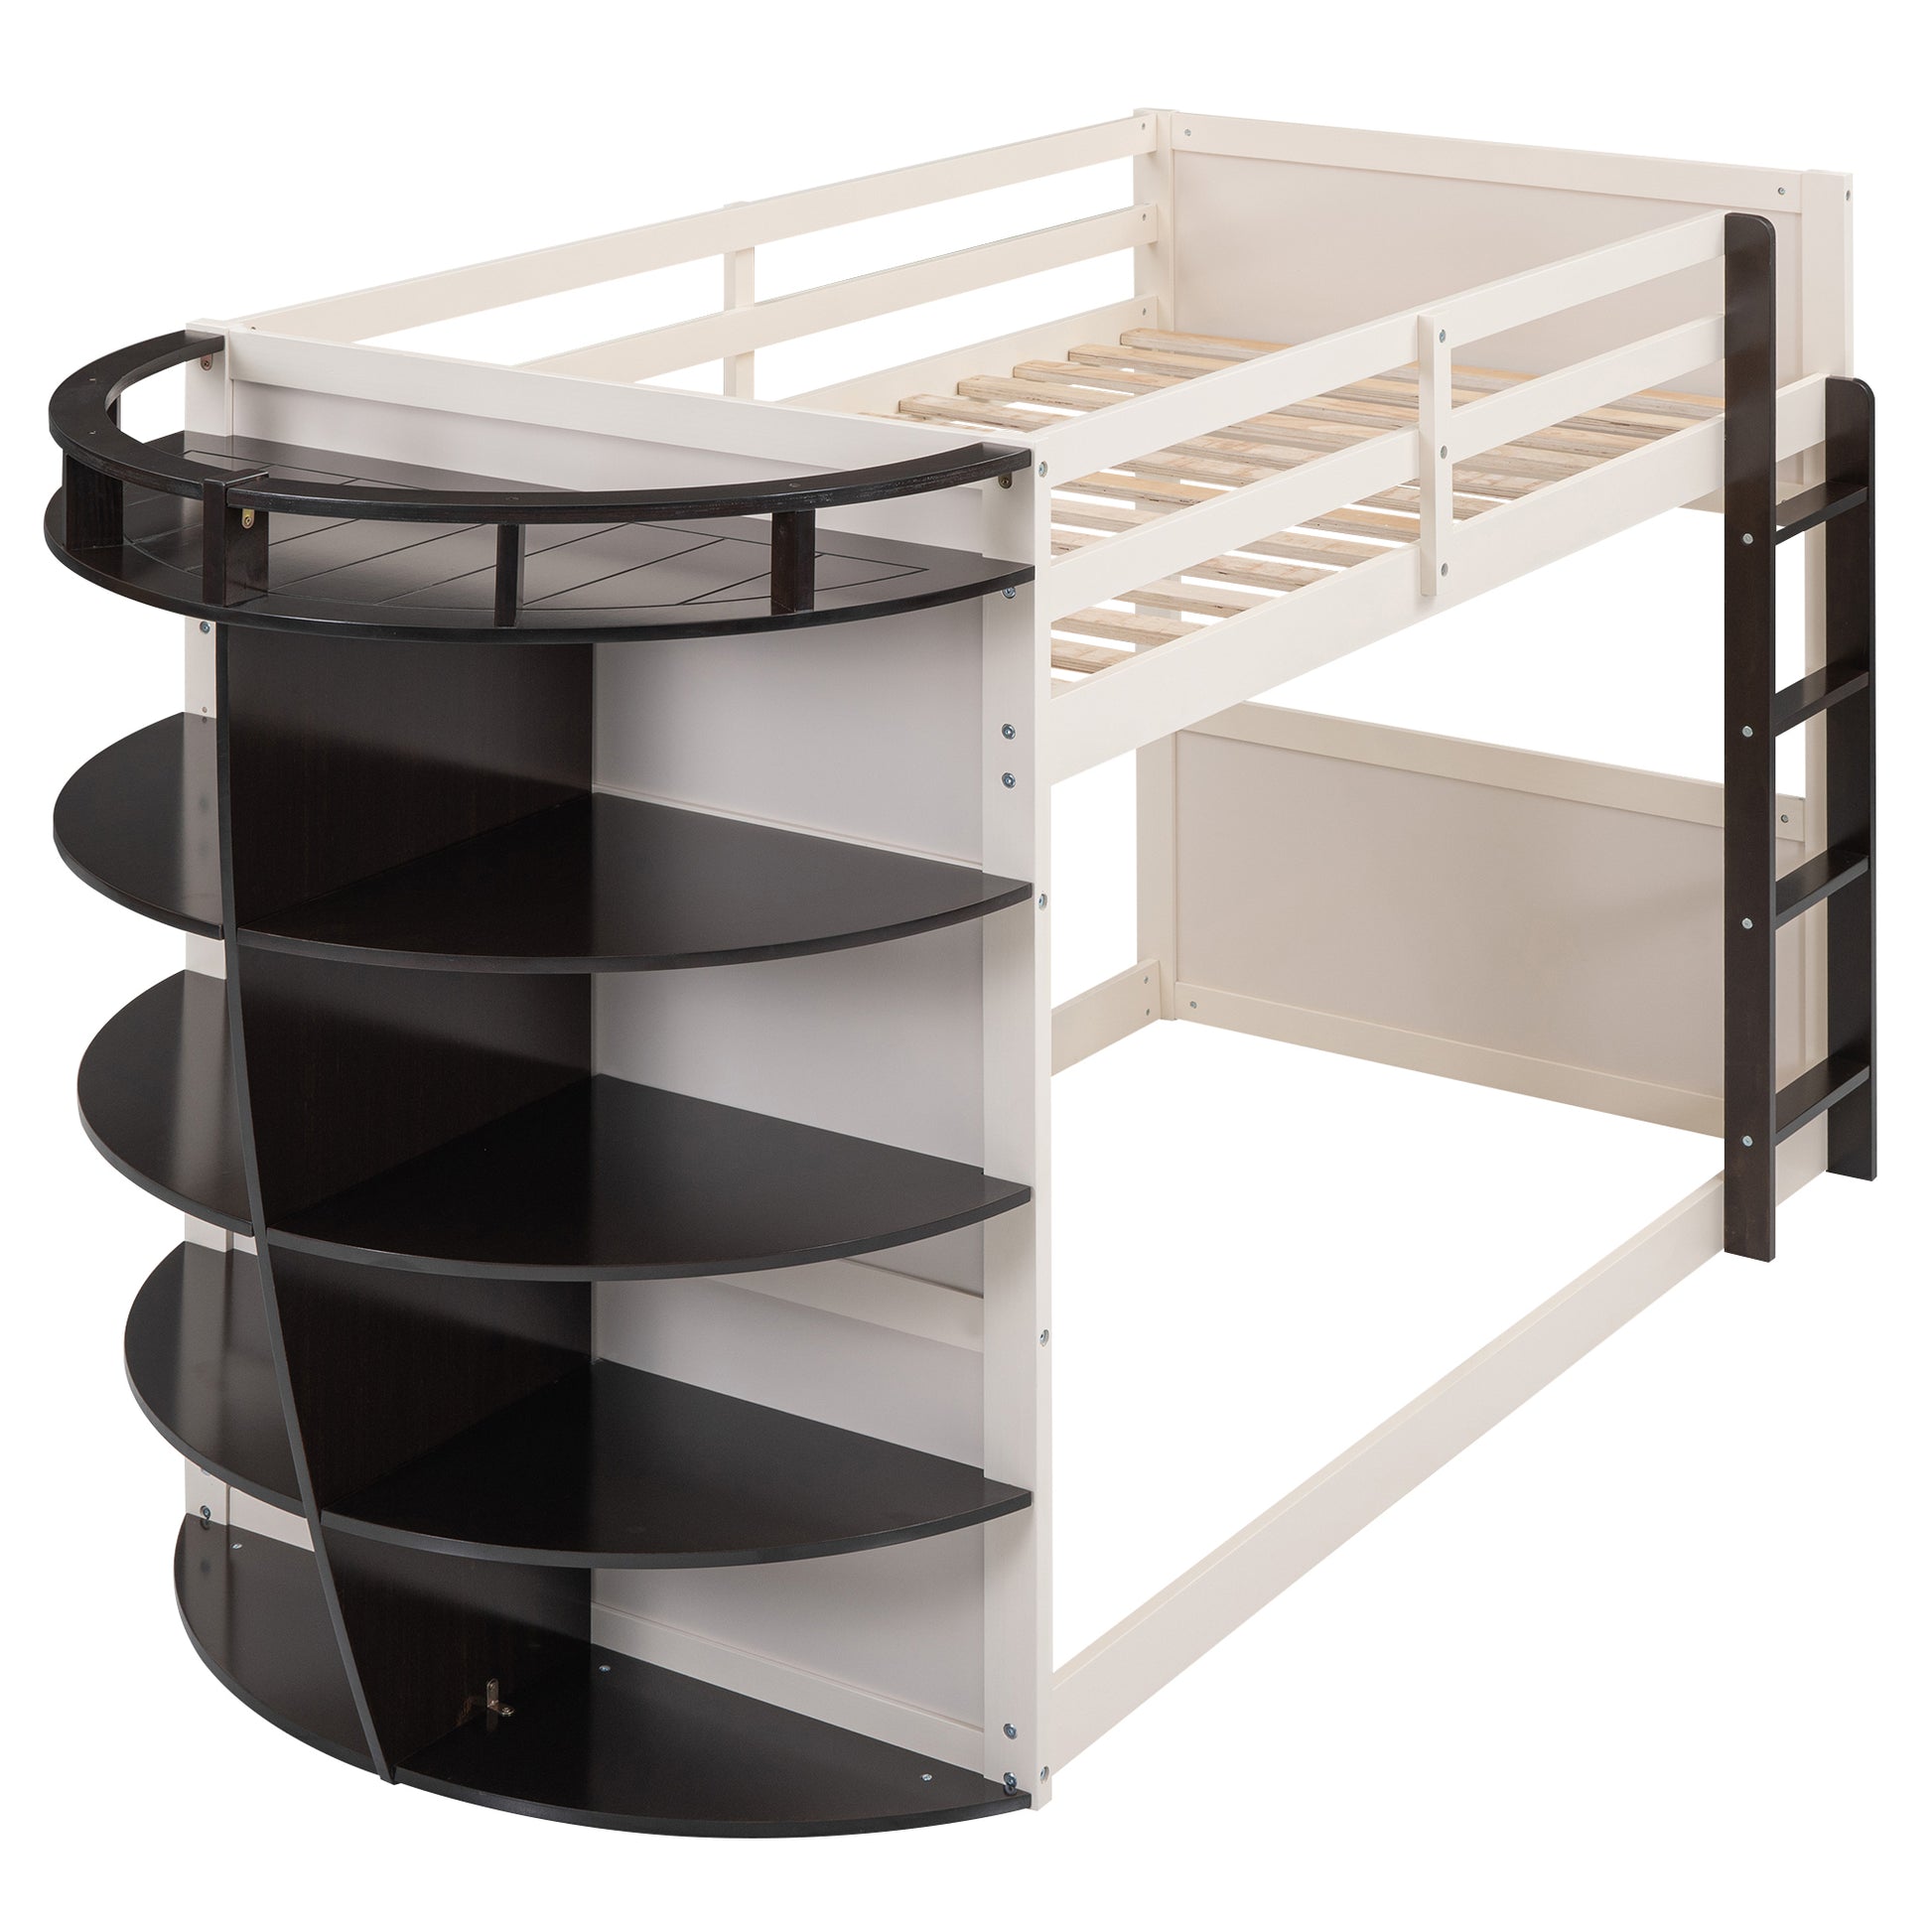 Twin over Twin Boat-Like Shape Bunk Bed with Storage Shelves, Cream+Espresso - Enova Luxe Home Store